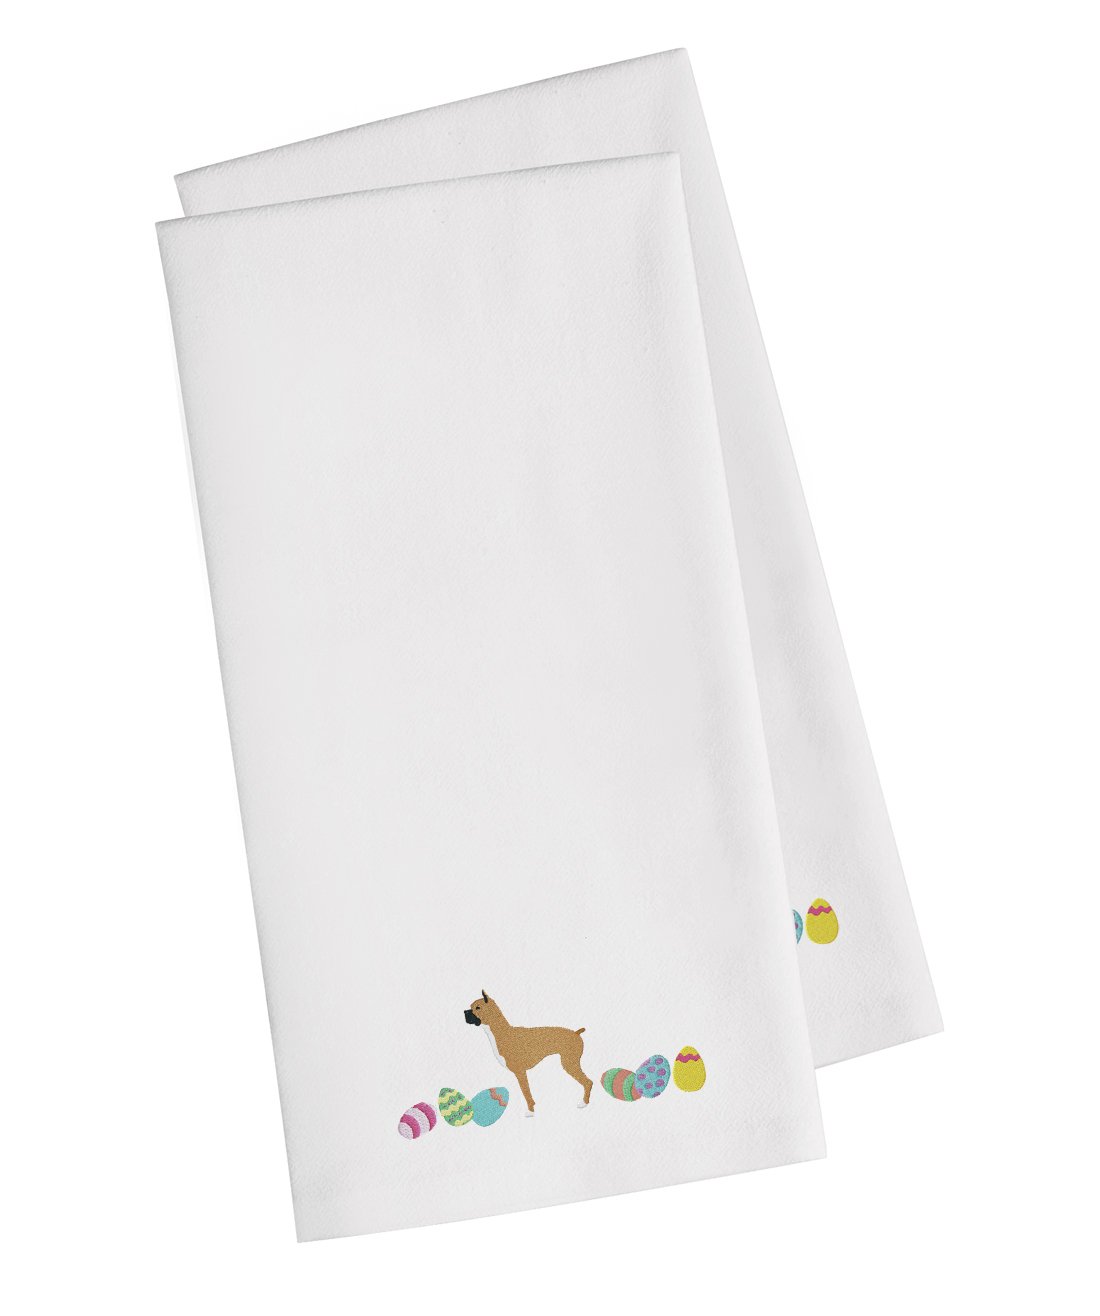 Boxer Easter White Embroidered Kitchen Towel Set of 2 CK1615WHTWE by Caroline's Treasures